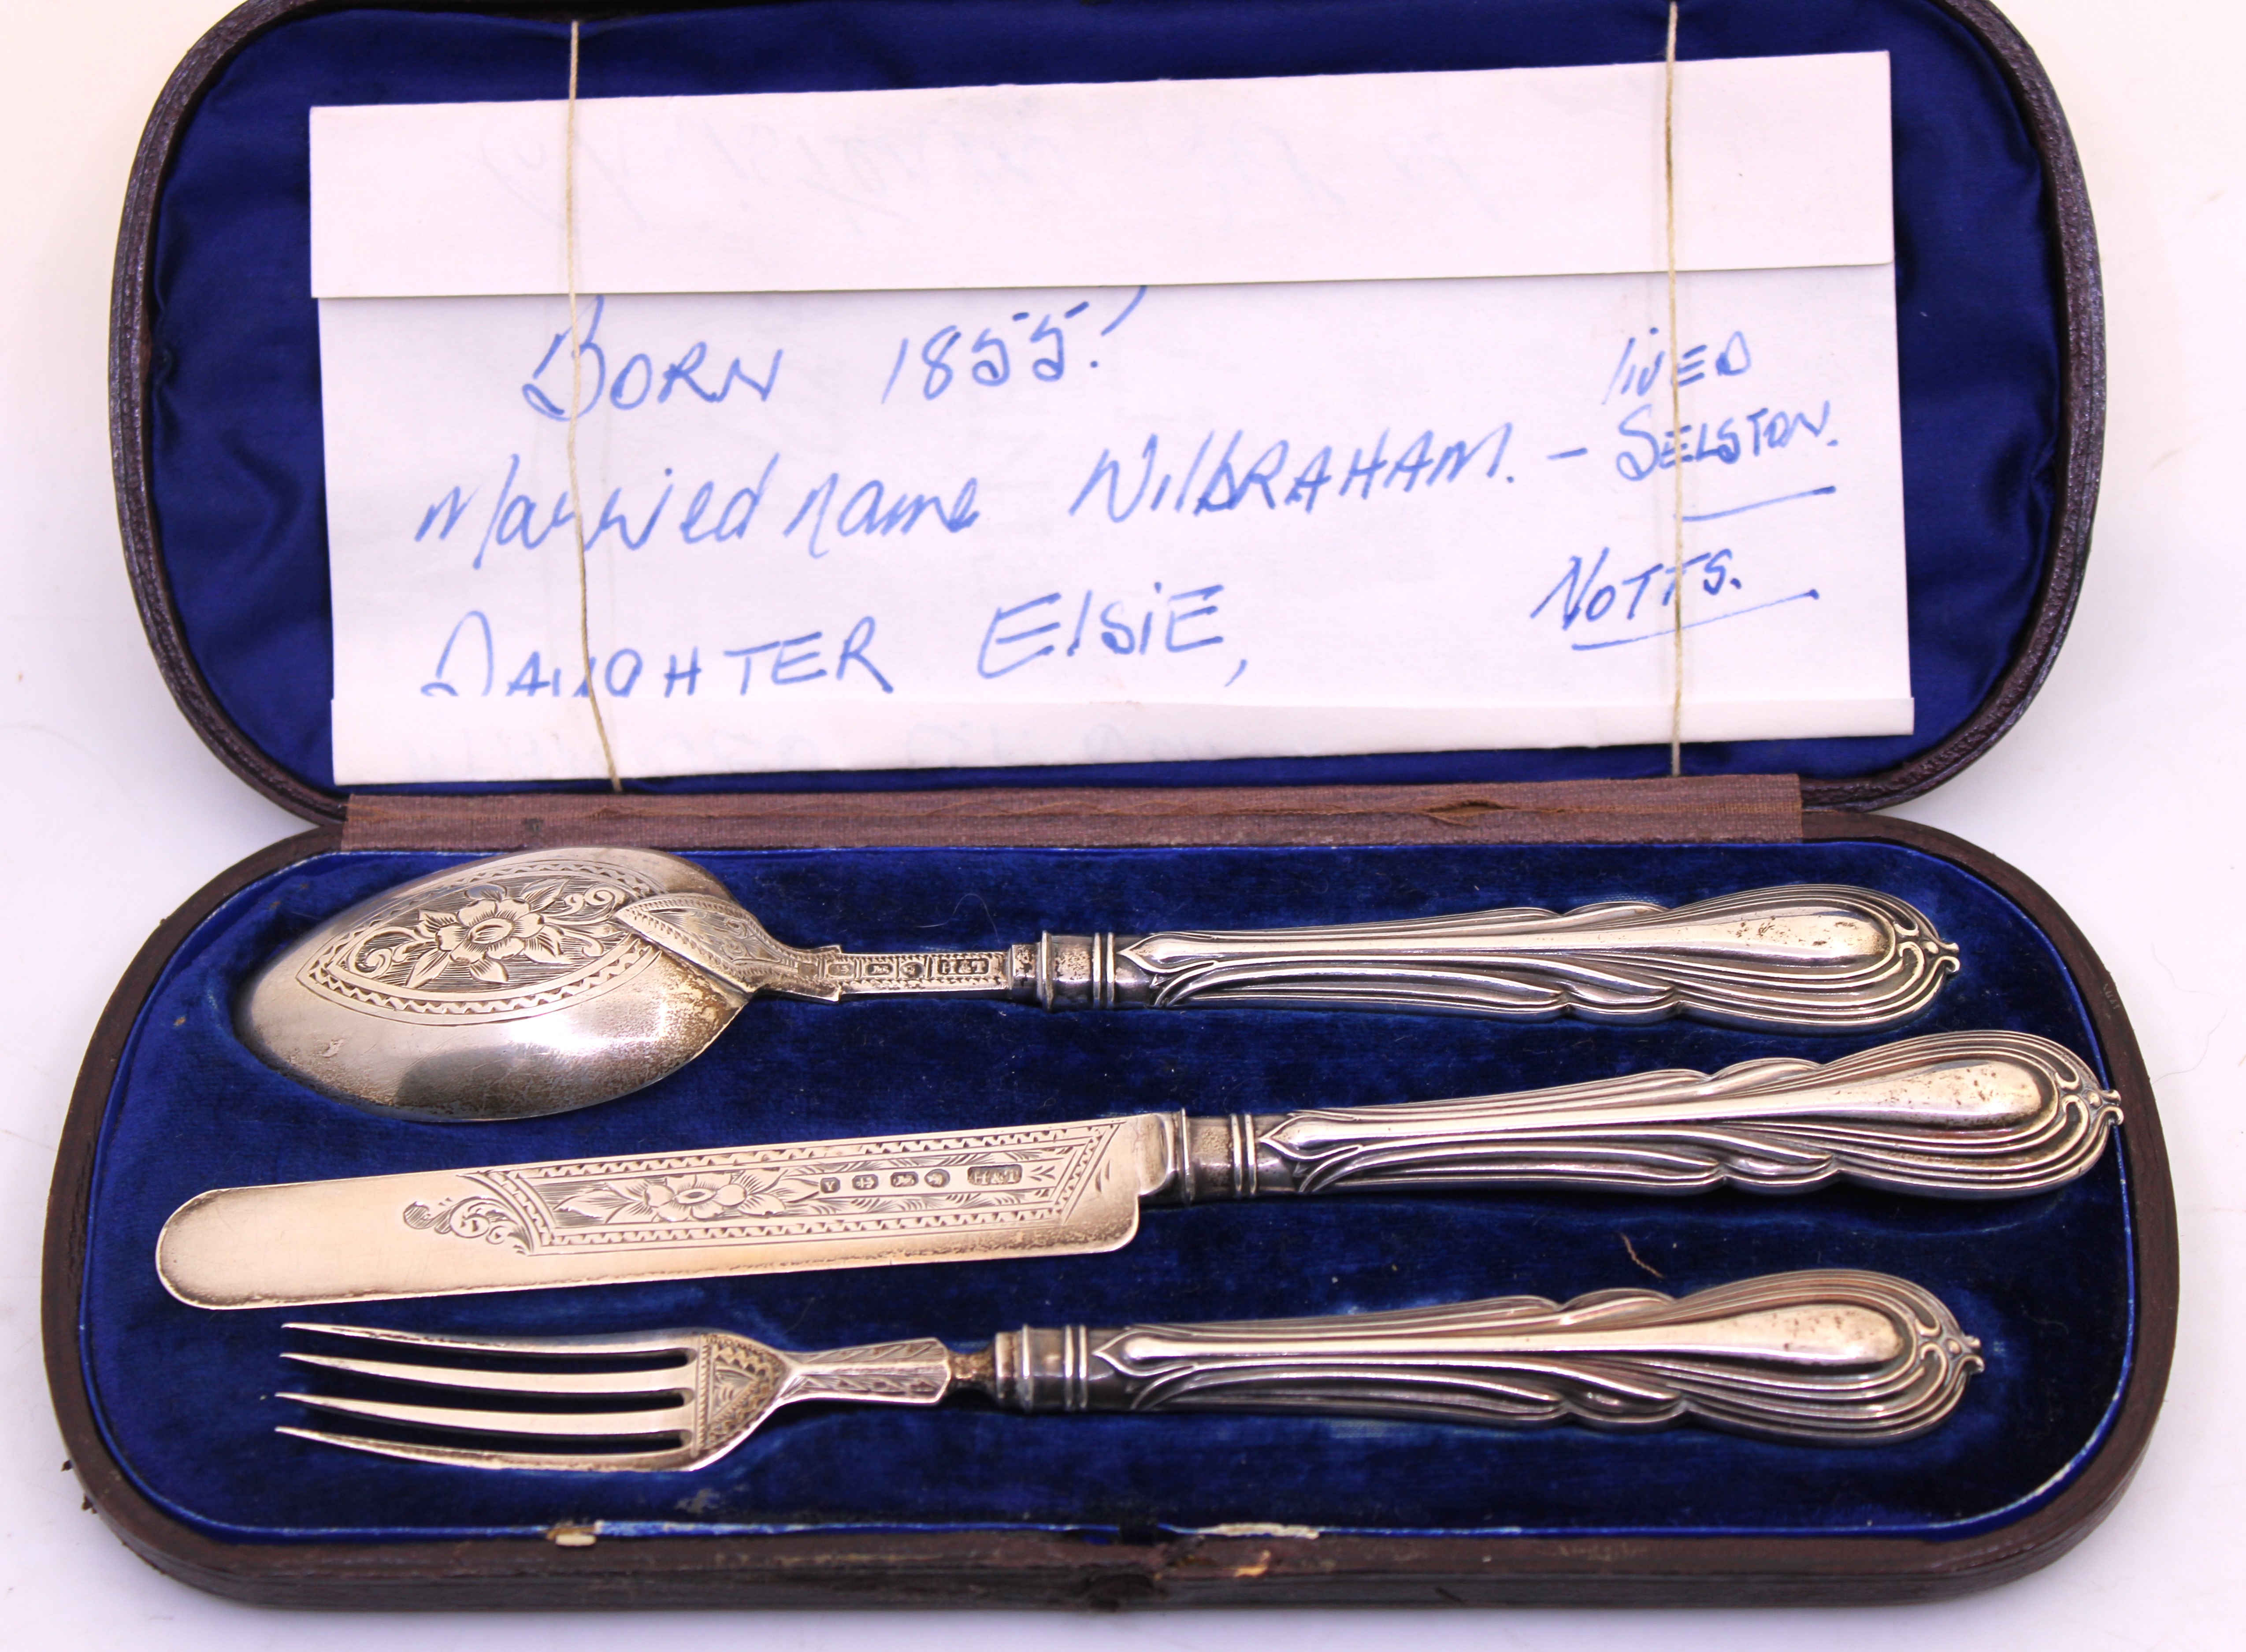 Three Piece Sterling Silver Christening Set.  To include a Spoon, Knife and Fork.  They are all